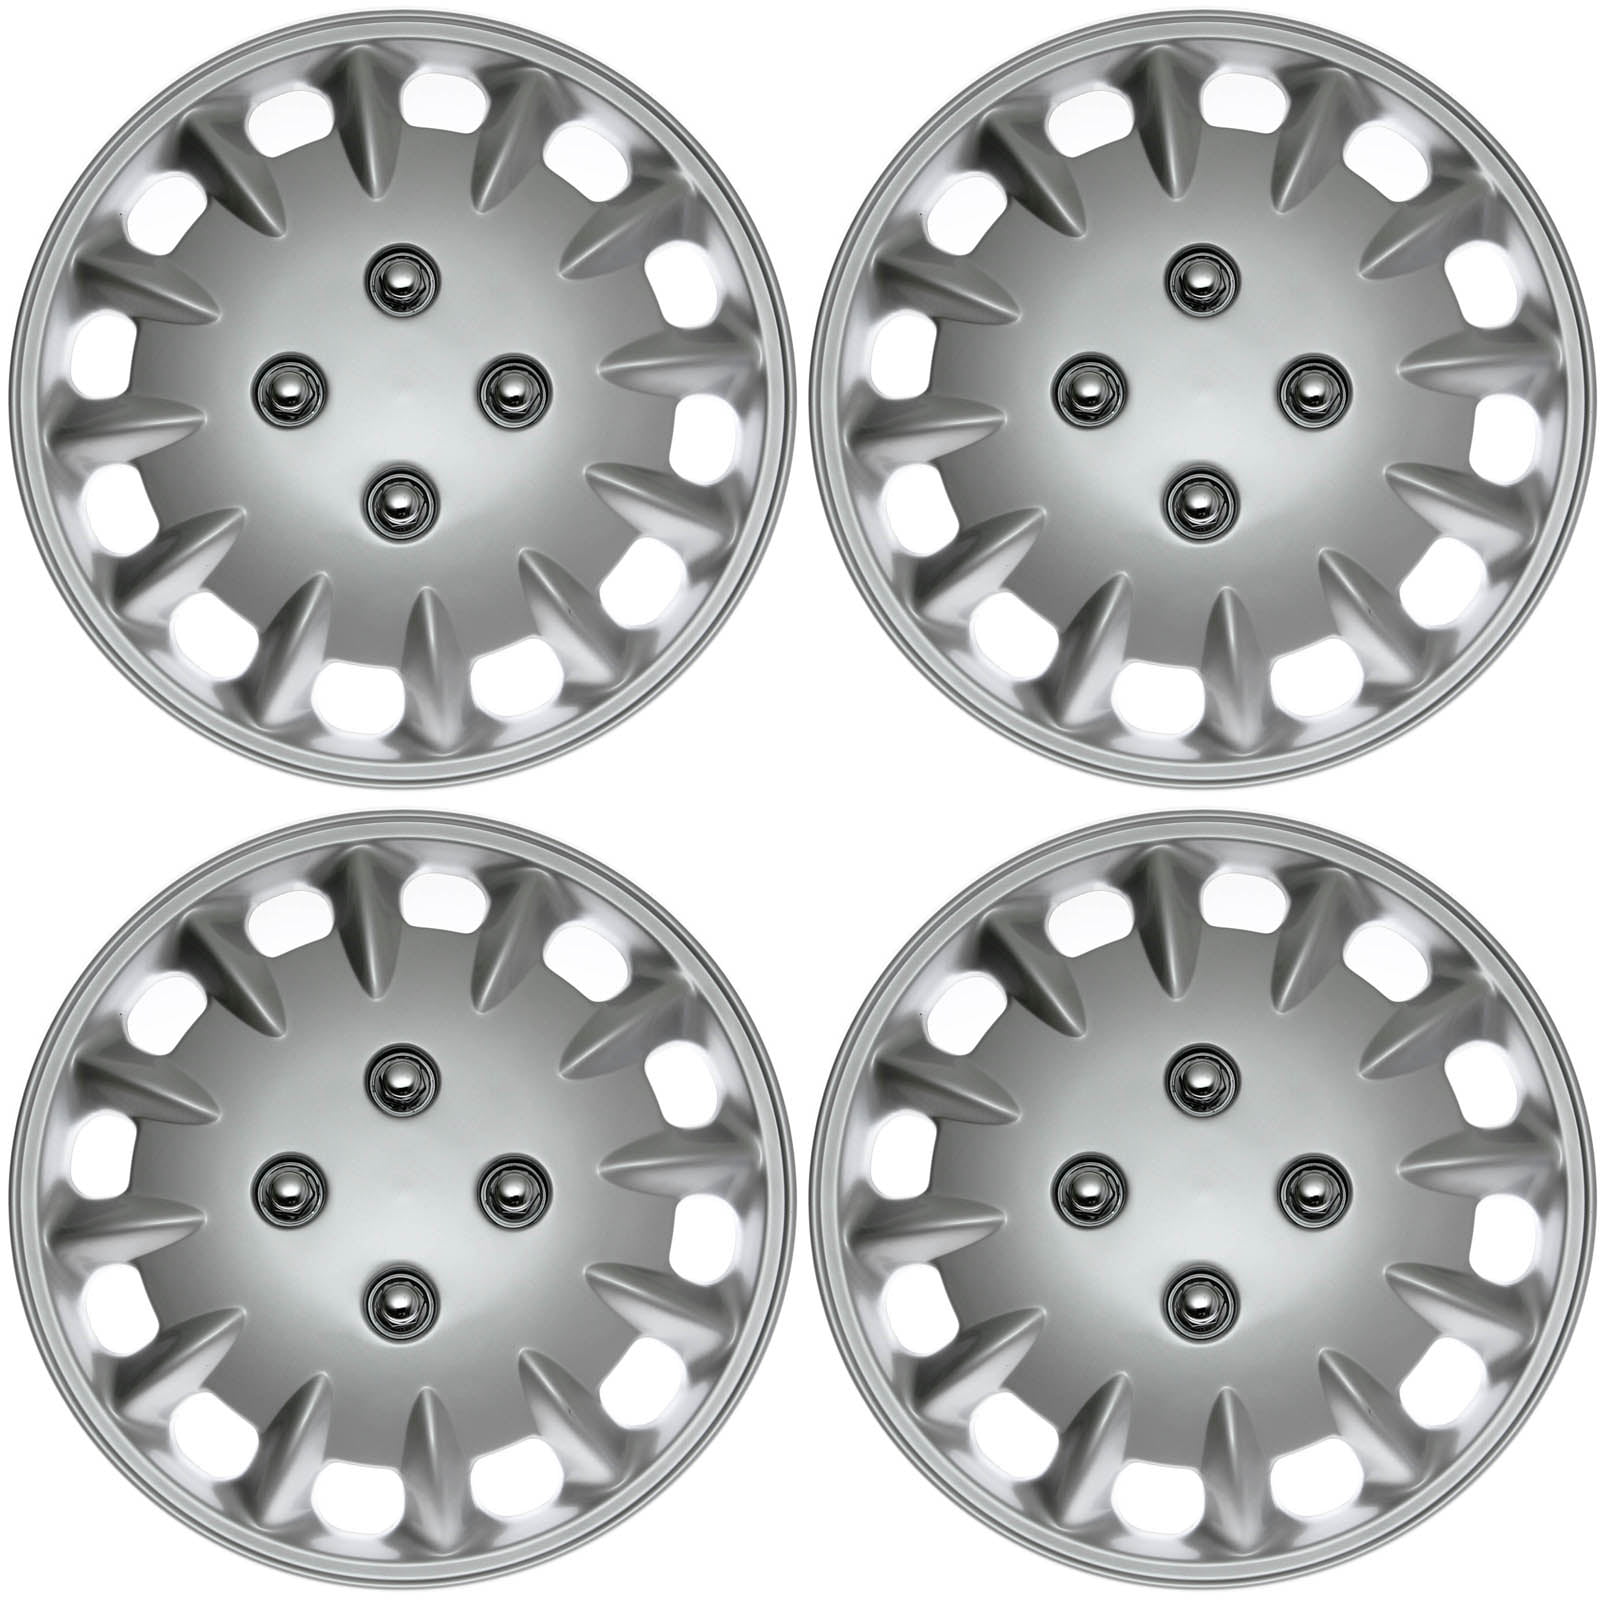 Rims Cover Wheel Skin Covers 14" Inches ABS Plastic Hubcap 4pcs Style #B721 